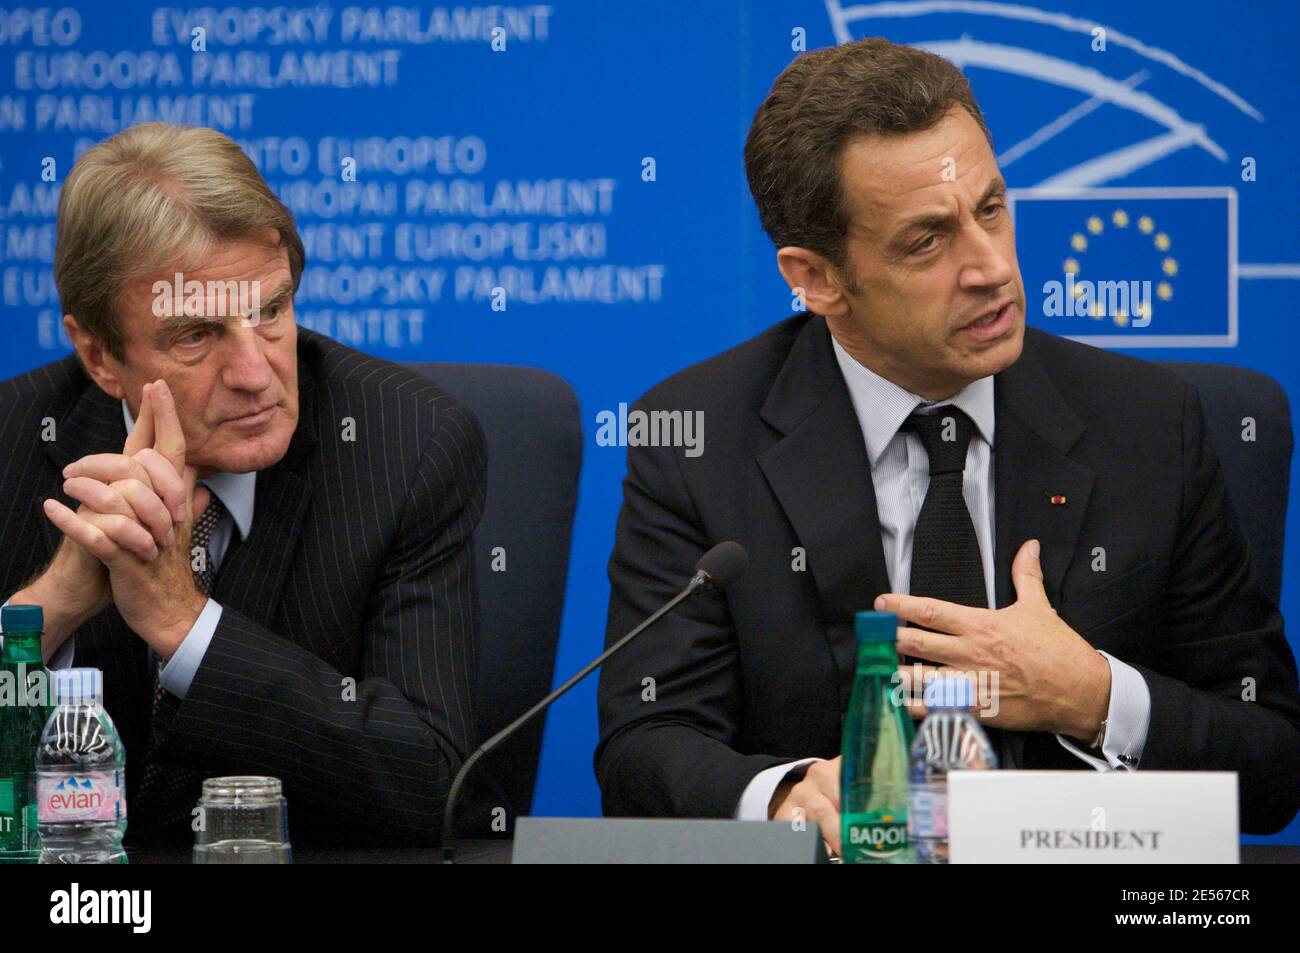 Nicolas Sarkozy (R) addresses the European Parliament next to French foreign affairs minister Bernard Kouchner (L,) in the eastern French city of Strasbourg on July 10, 2008. Nicolas Sarkozy expressed determination today to solve the European Union's reform treaty woes by the end of the year, but appealed for help from all Europe's political forces. Laying out France's priorities for its six-months at the EU helm, Sarkozy also warned that the future of the enlargement process was also under threat, since Ireland rejected the Lisbon Treaty last month. Photo by Antoine/ABACAPRESS.COM Stock Photo